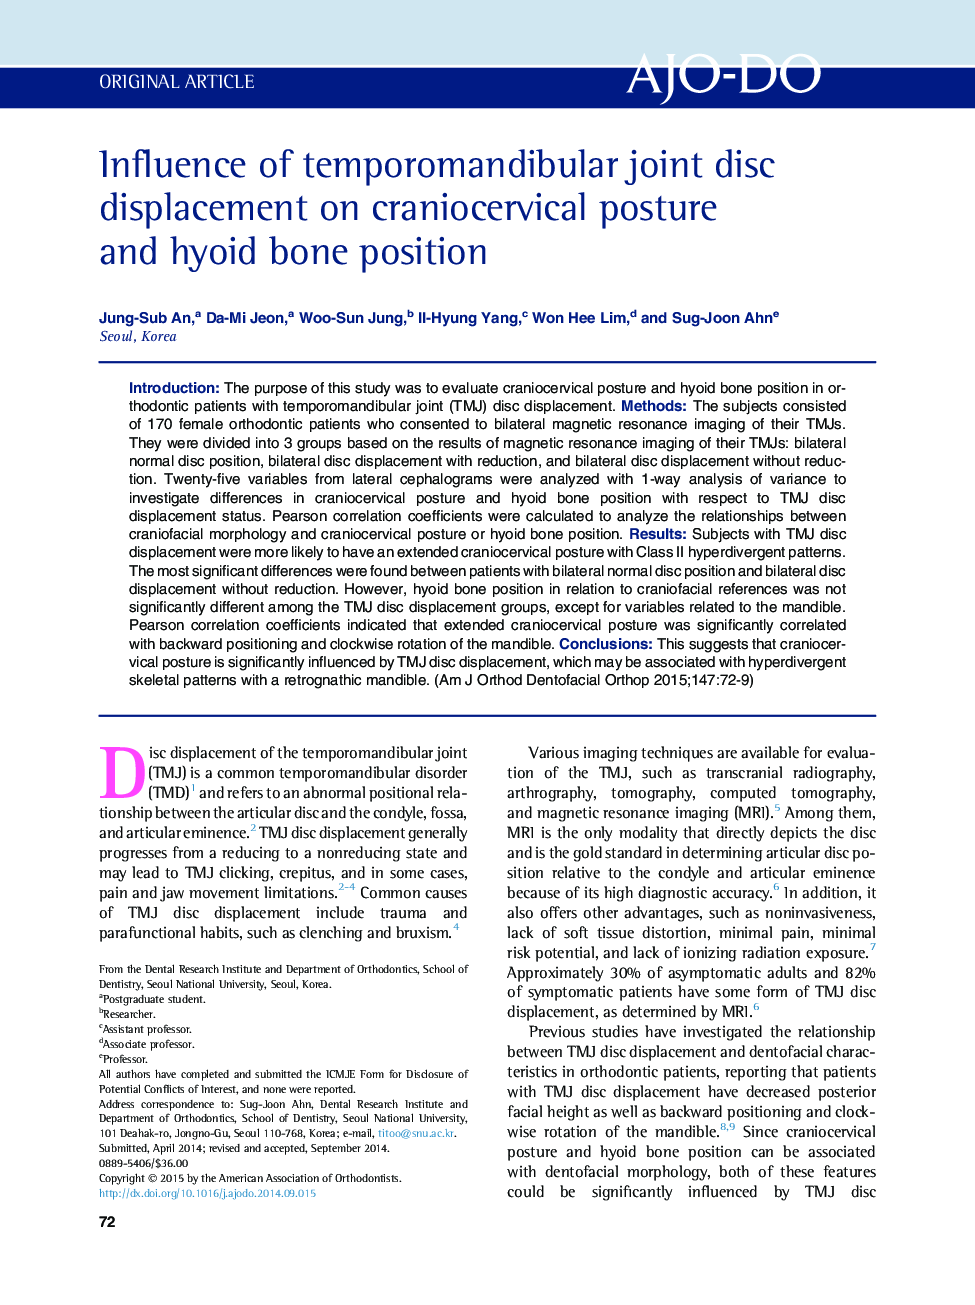 Influence of temporomandibular joint disc displacement on craniocervical posture and hyoid bone position 